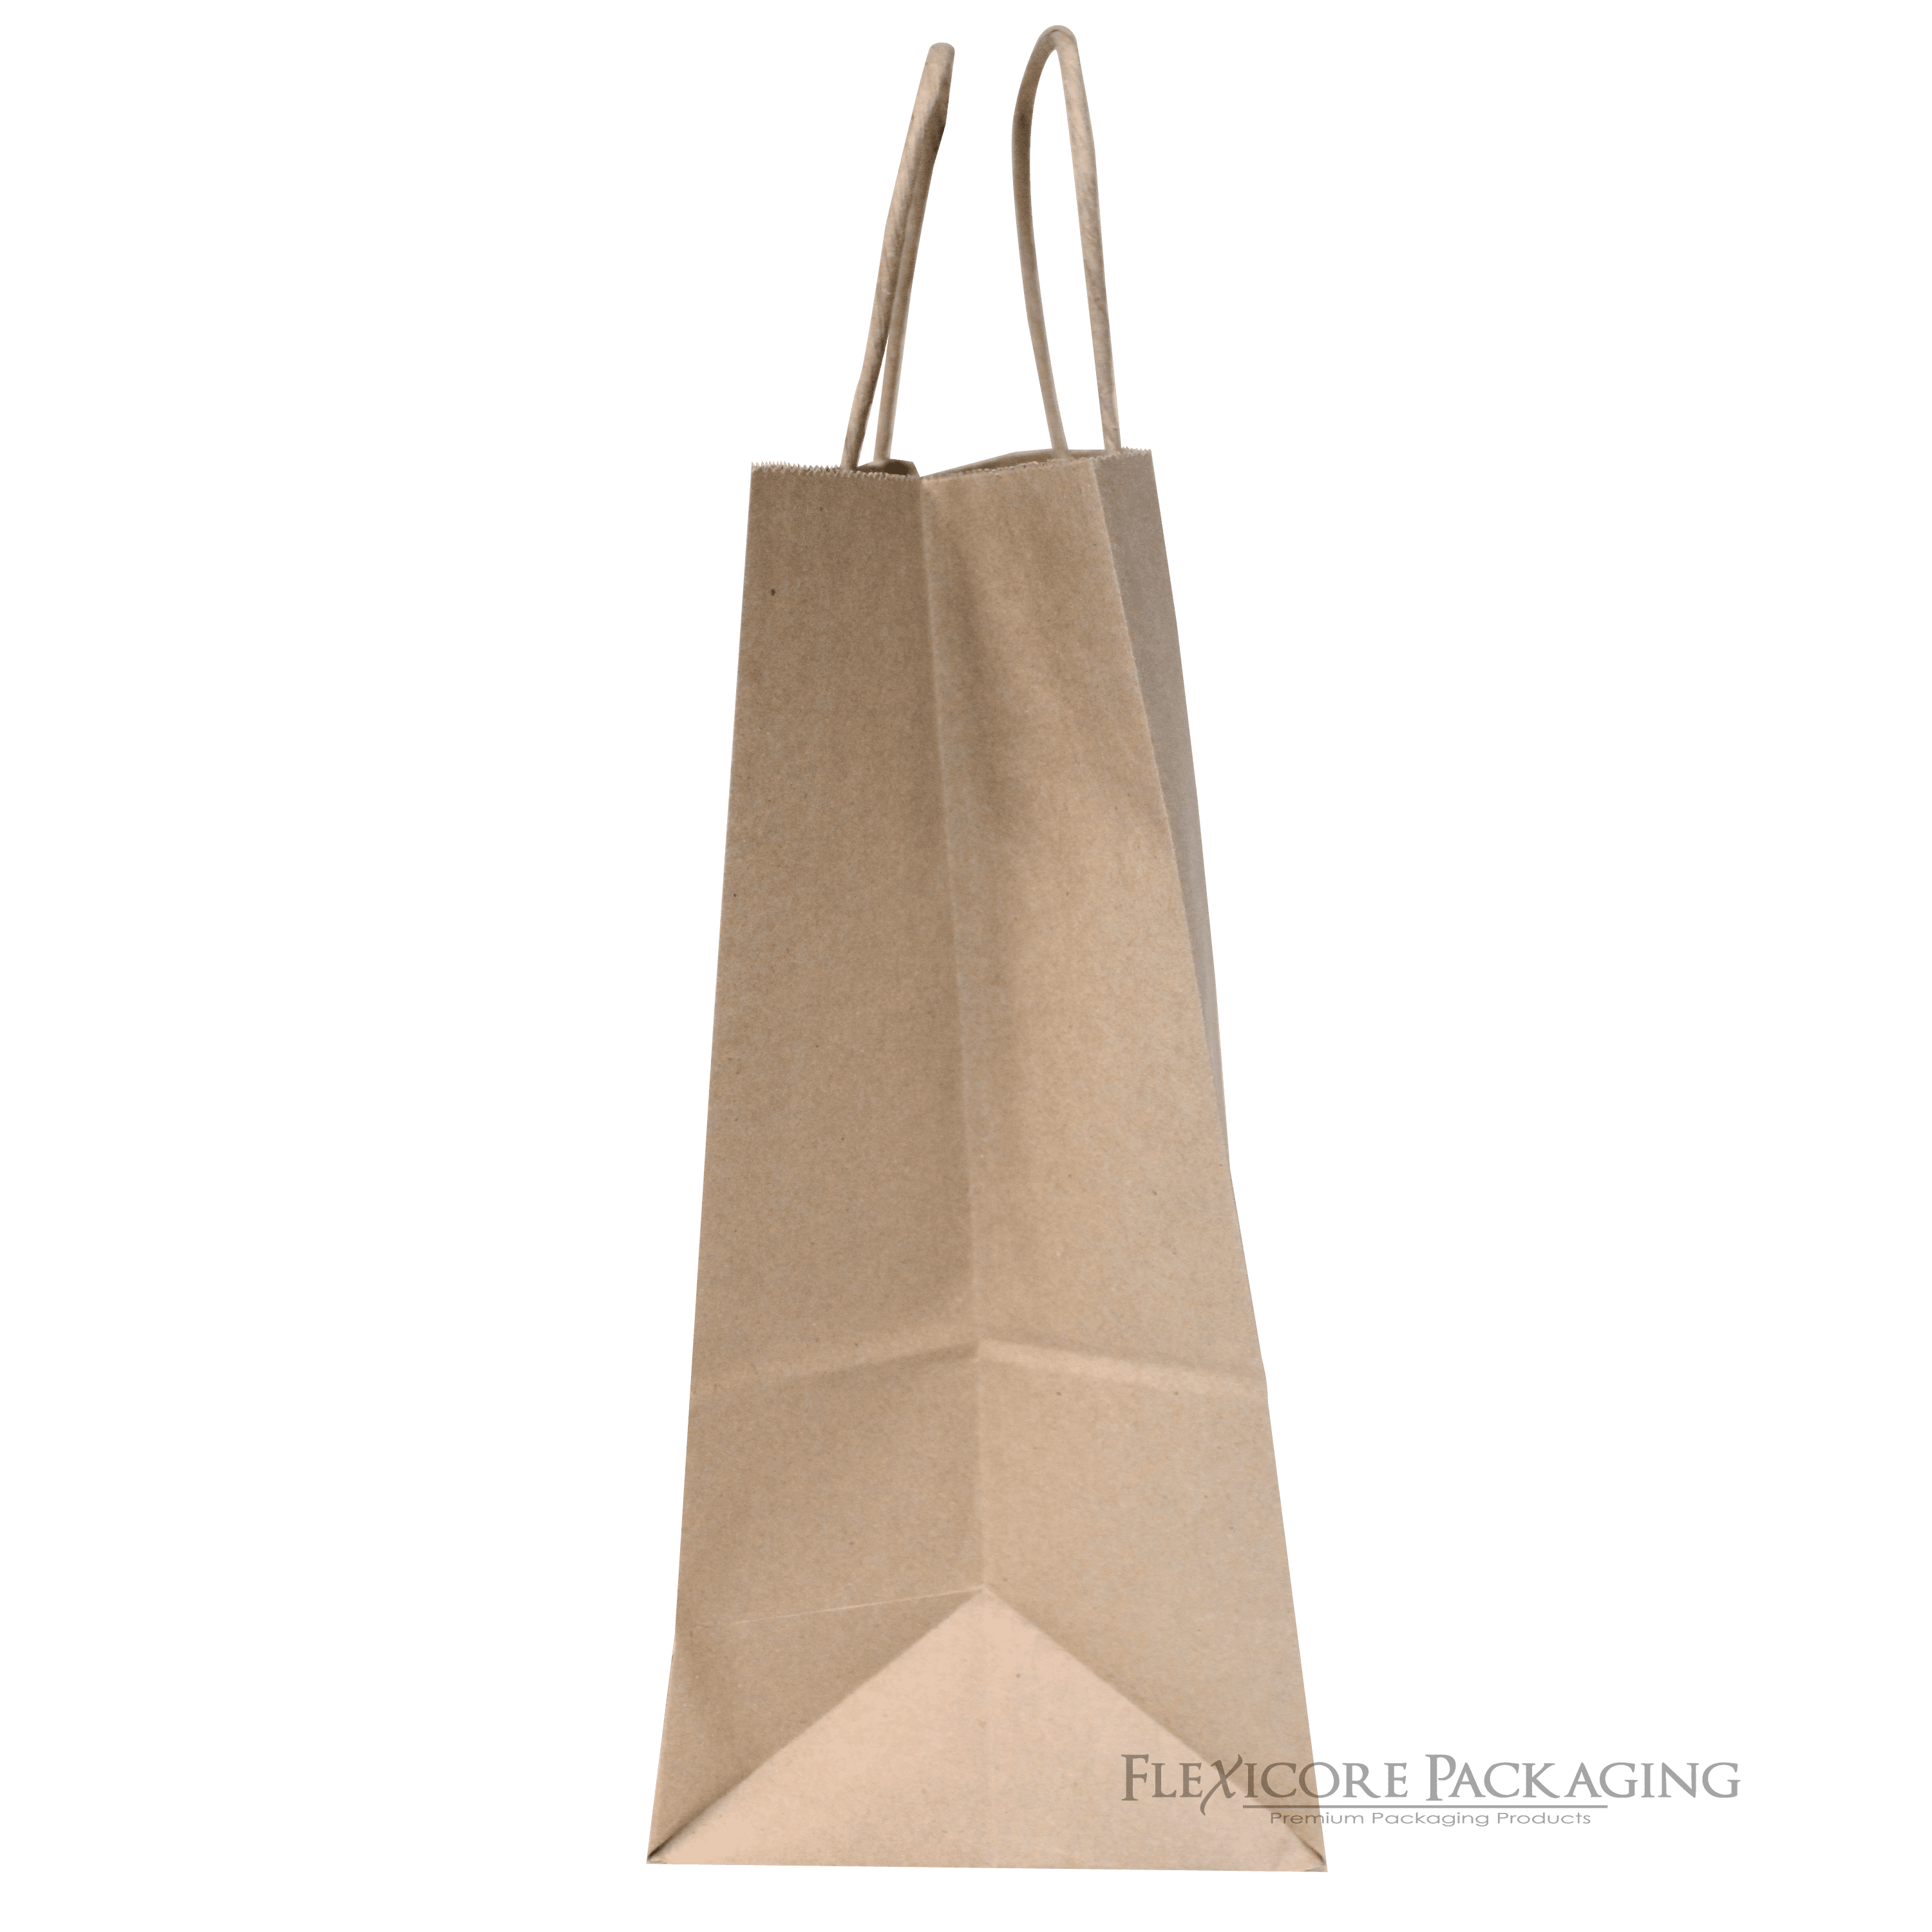 Wedding Merchandise Craft Fair Party Christmas Paper Bags with Handle,8 Pcs Kraft Paper Bag Holiday Party Gift Favor Treats Bags Durable Gift Wrapping Bags for Shopping A Business Gifts